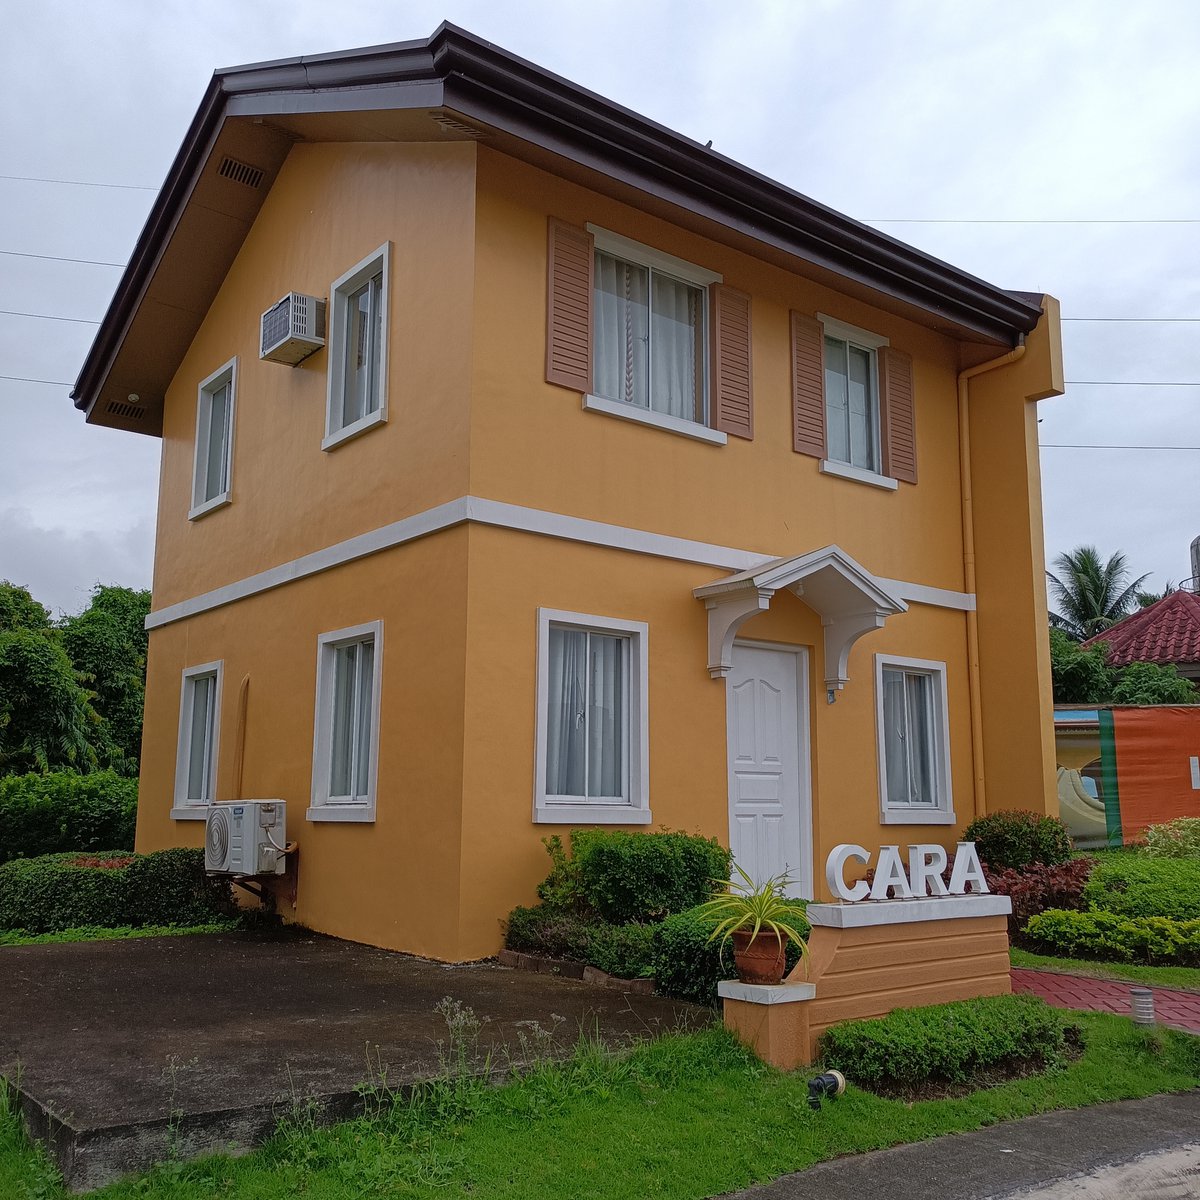 3-bedroom Single Detached House For Sale in Pili Camarines Sur